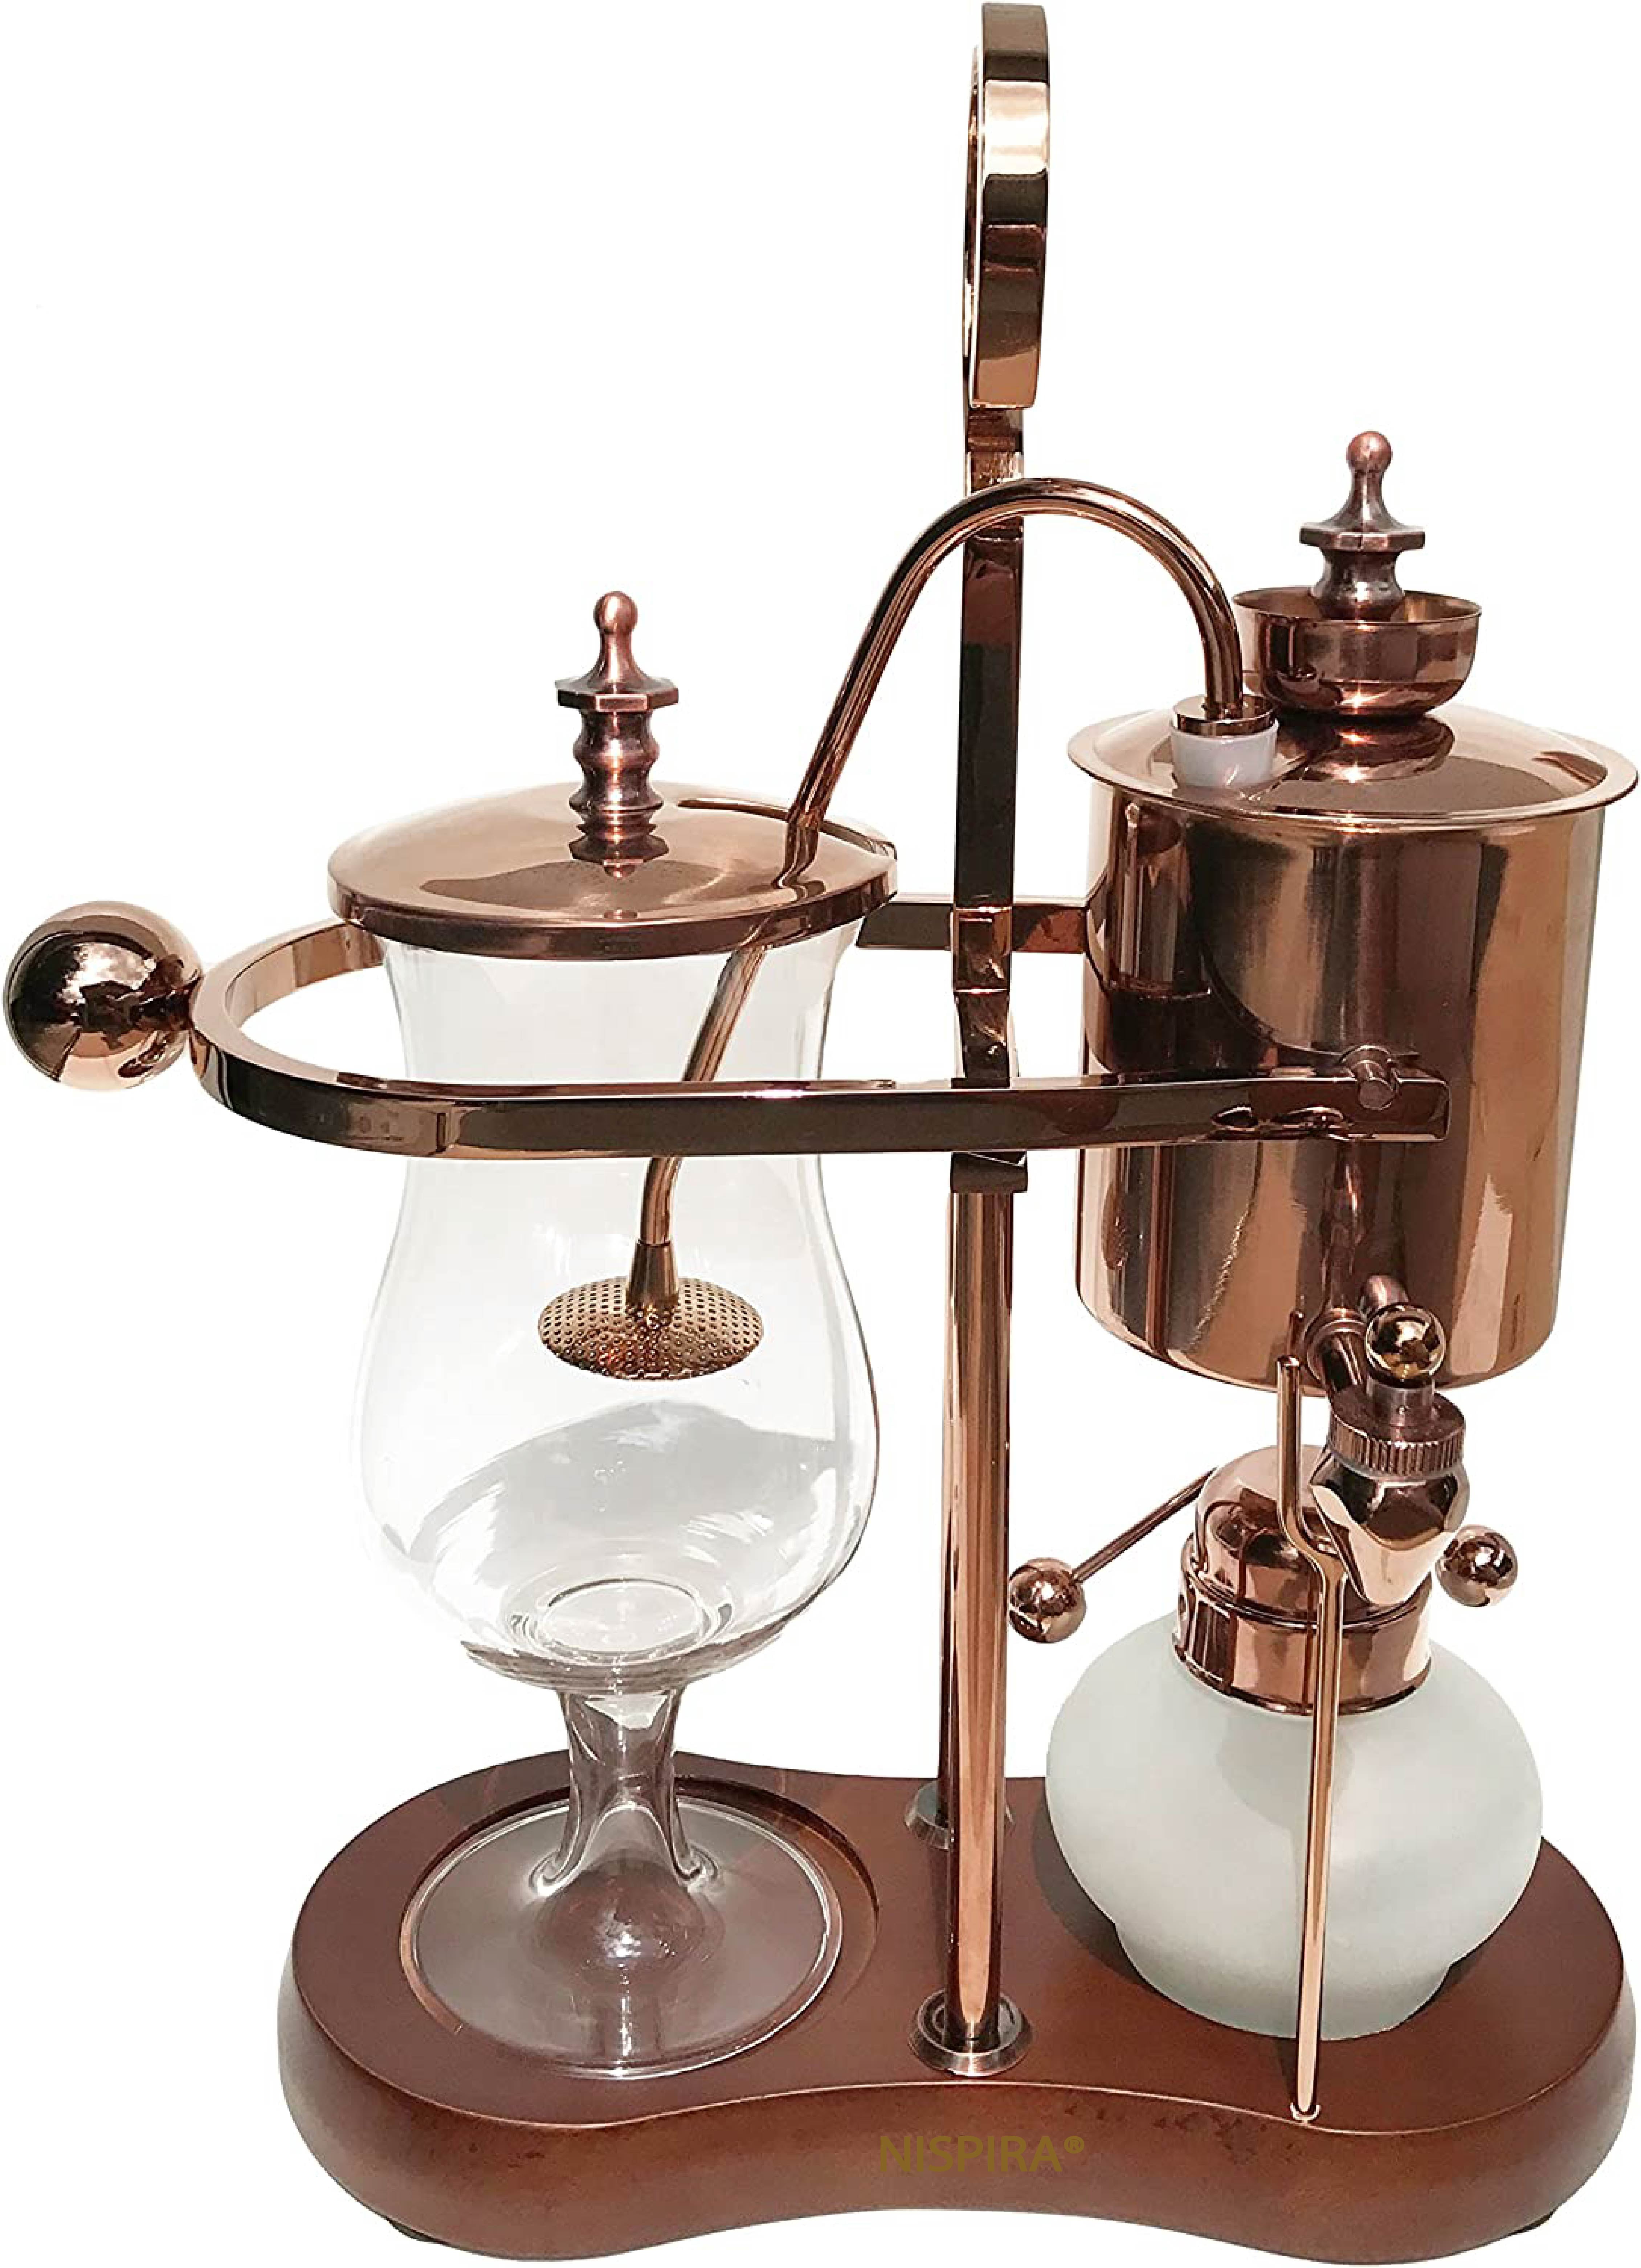 Belgian Belgium Royal Family Balance Siphon Syphon Coffee Maker with Tee Handle Silver Color,1 Set 